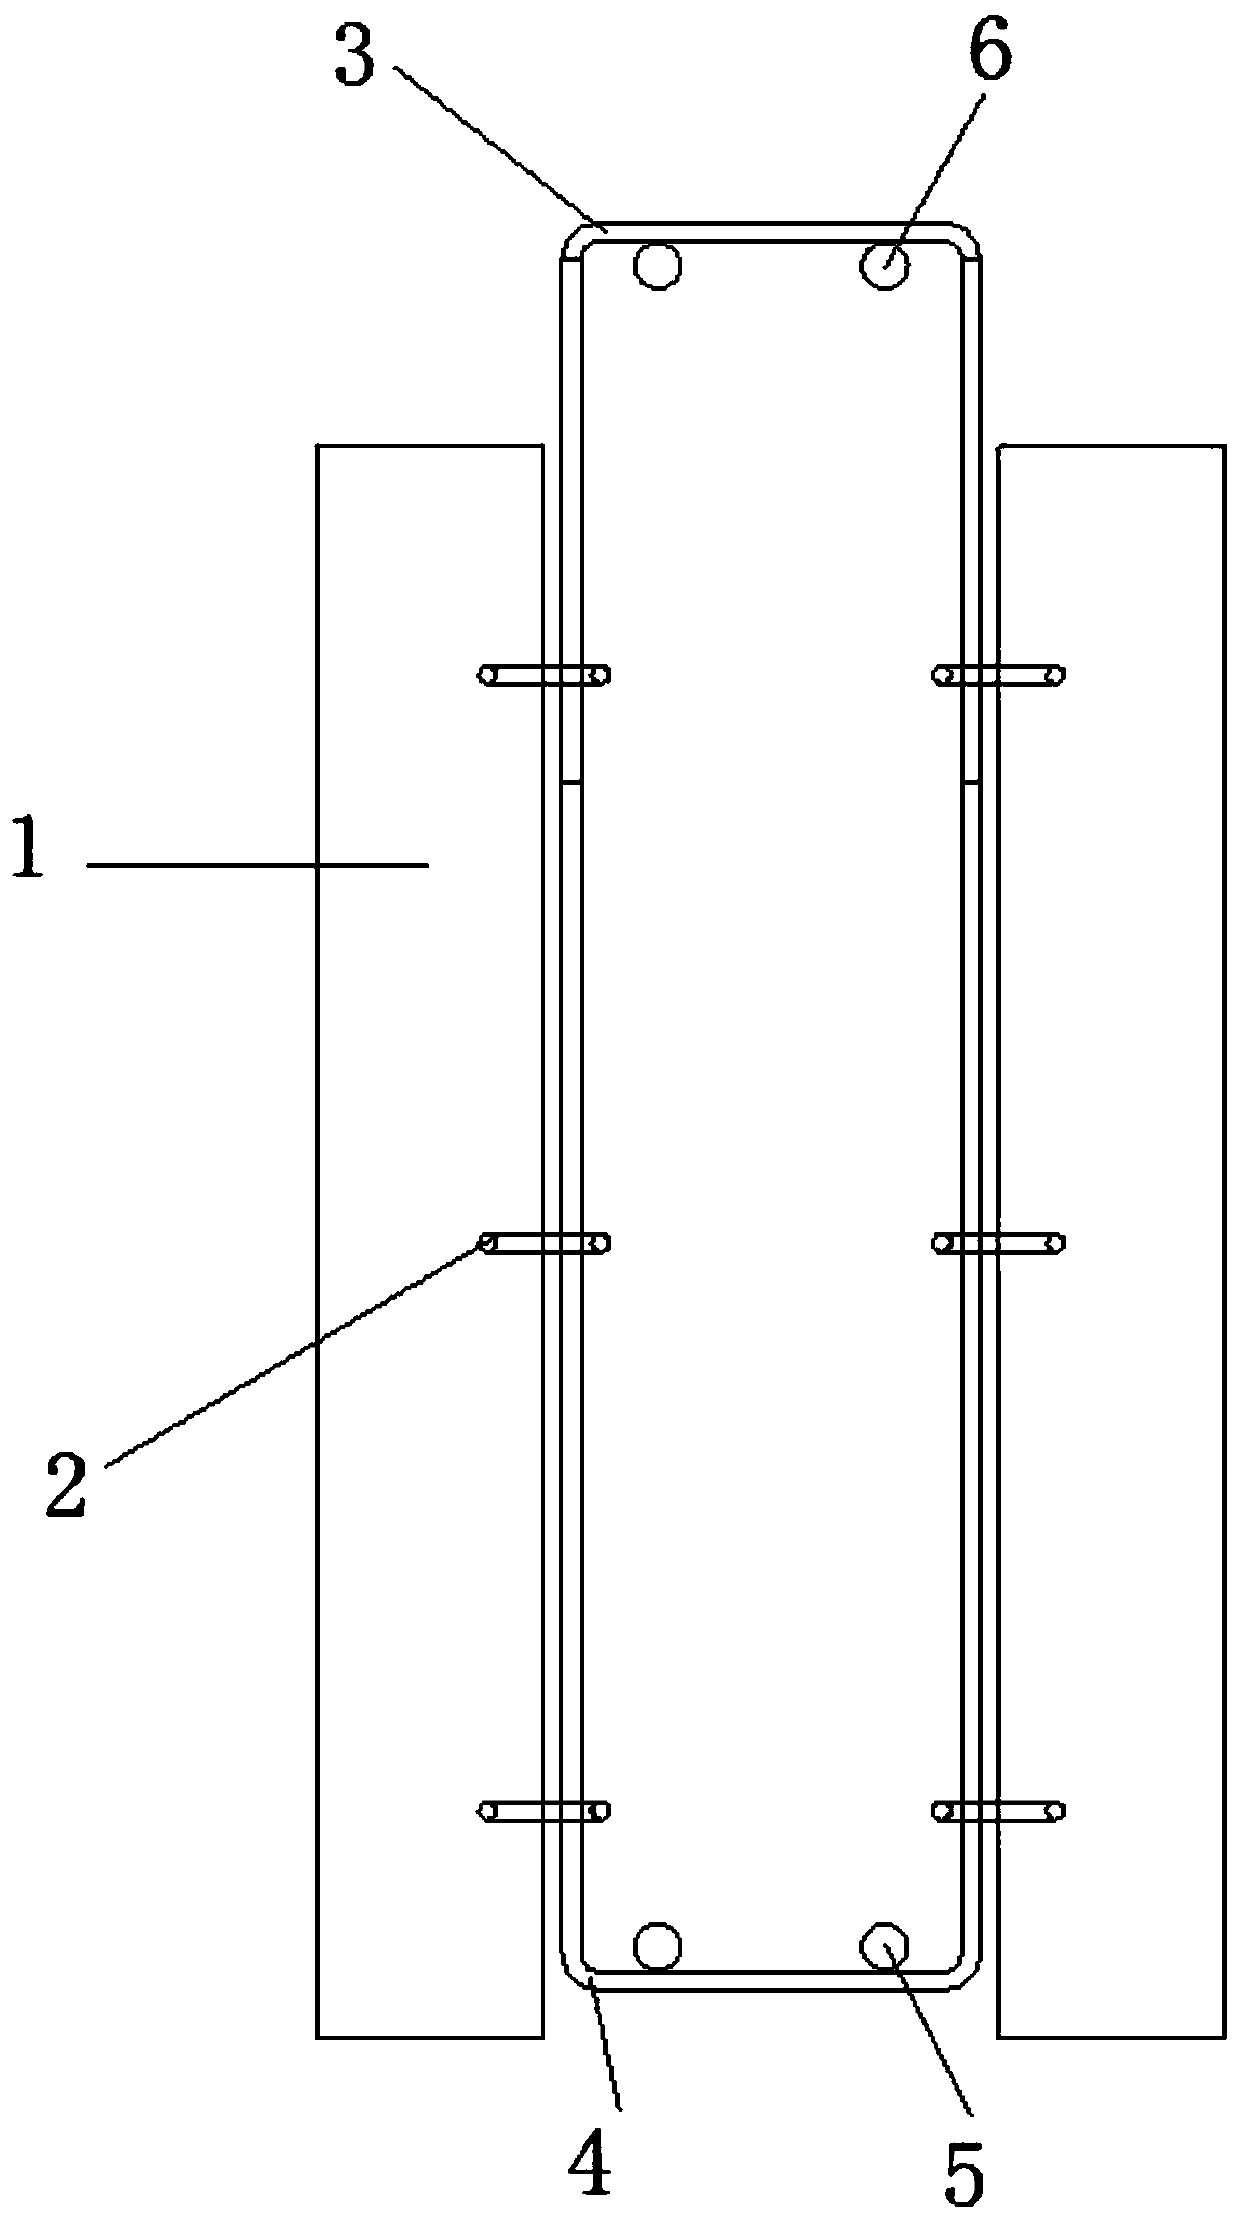 Fabricated cast-in-place combined beam structure